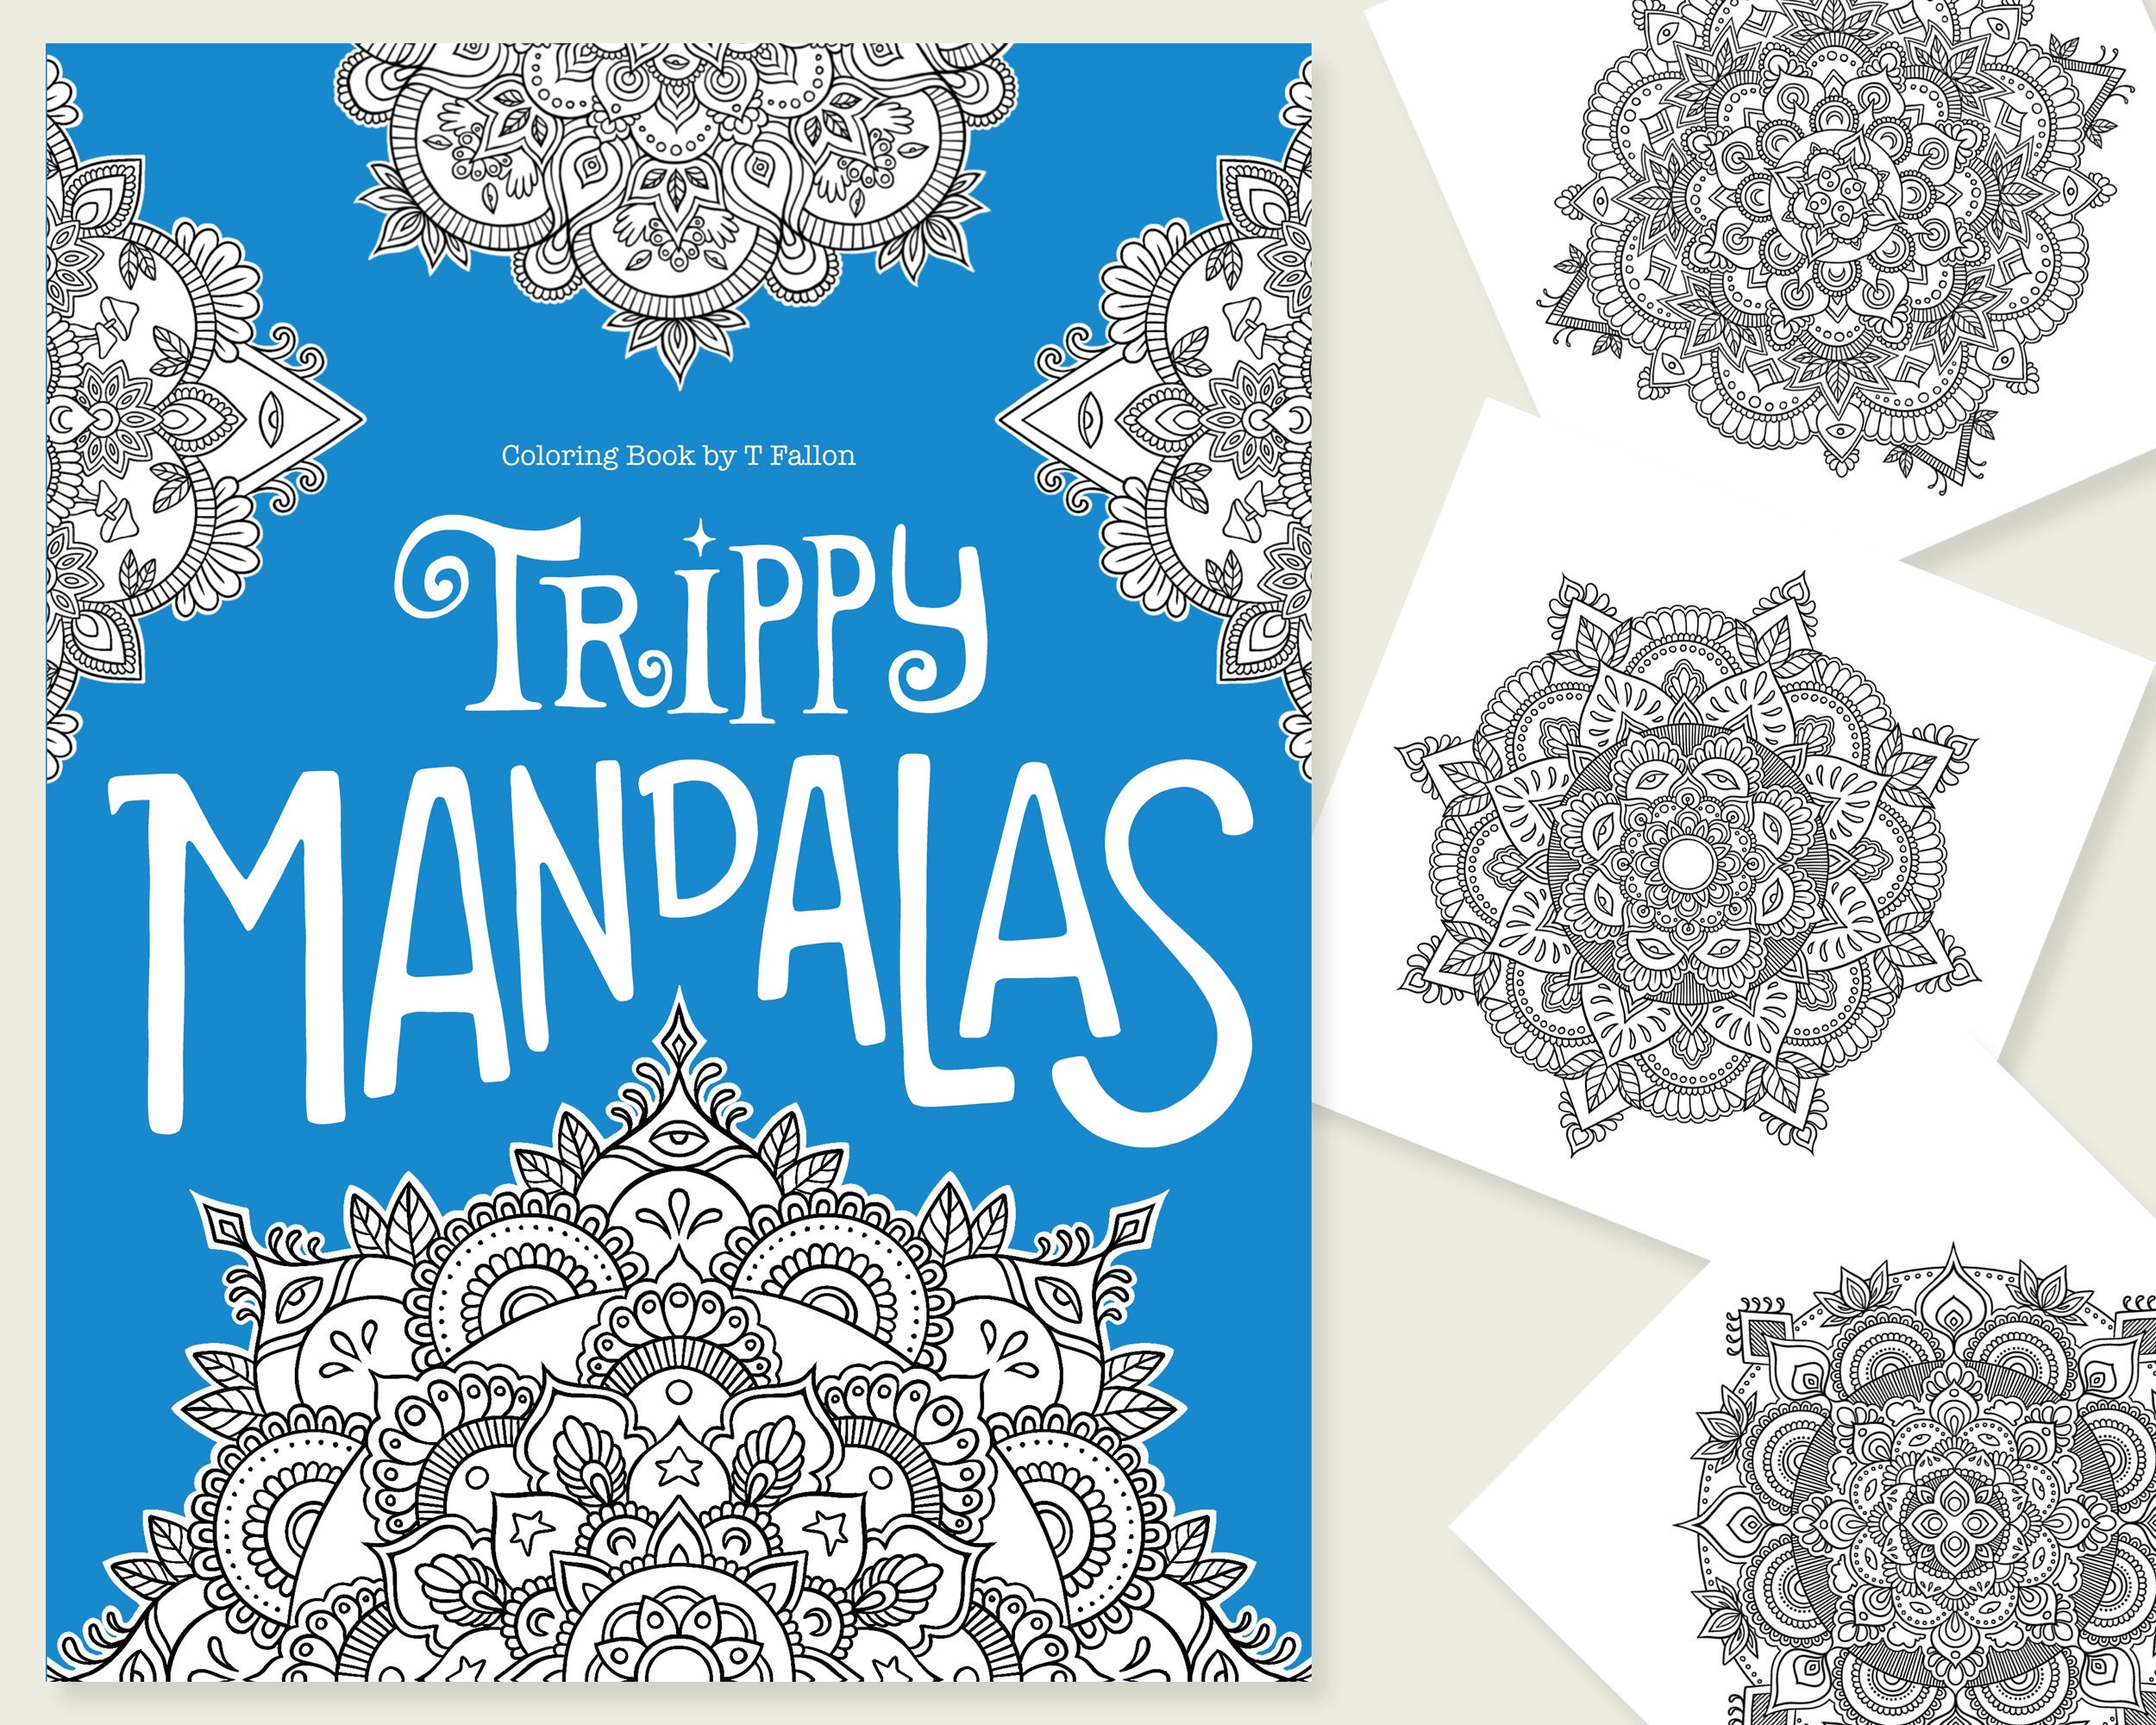 Mandala Coloring Book for Teens and Young Adults (8.5x8.5 Coloring